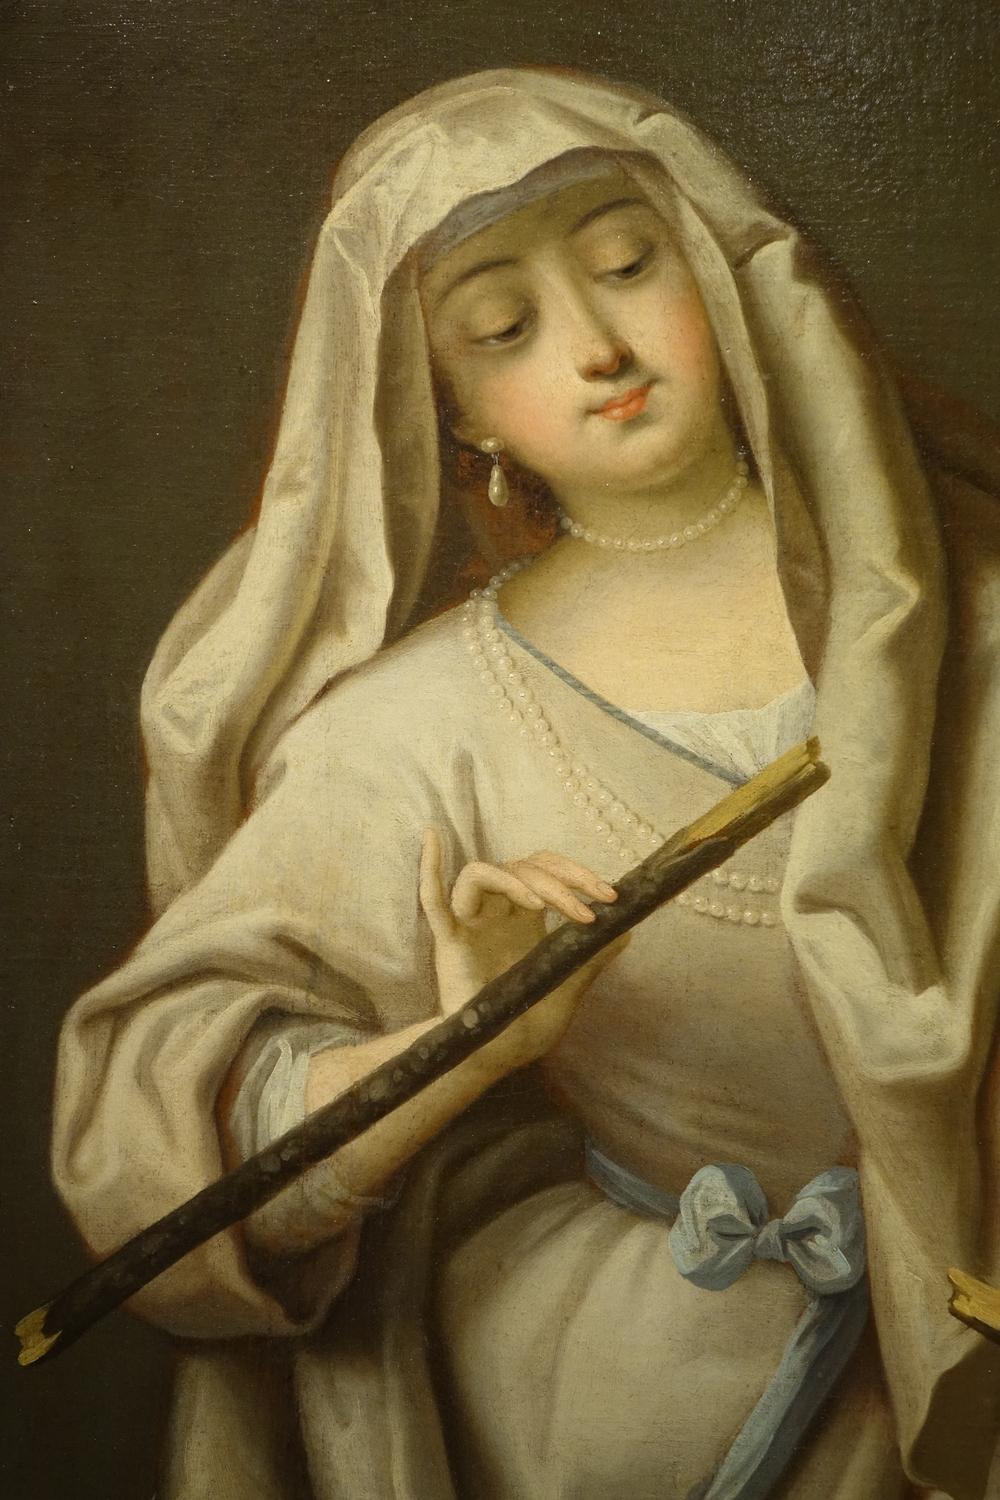 Young Vestal reviving the sacred fire.
Oil on canvas, French school of the 1st half of the 18th c., follower of Jean RAOUX 1677-1734.
In ancient Rome, the Vestals or Vestal Virgins were priestesses of Vesta, goddess of the home. The college of the